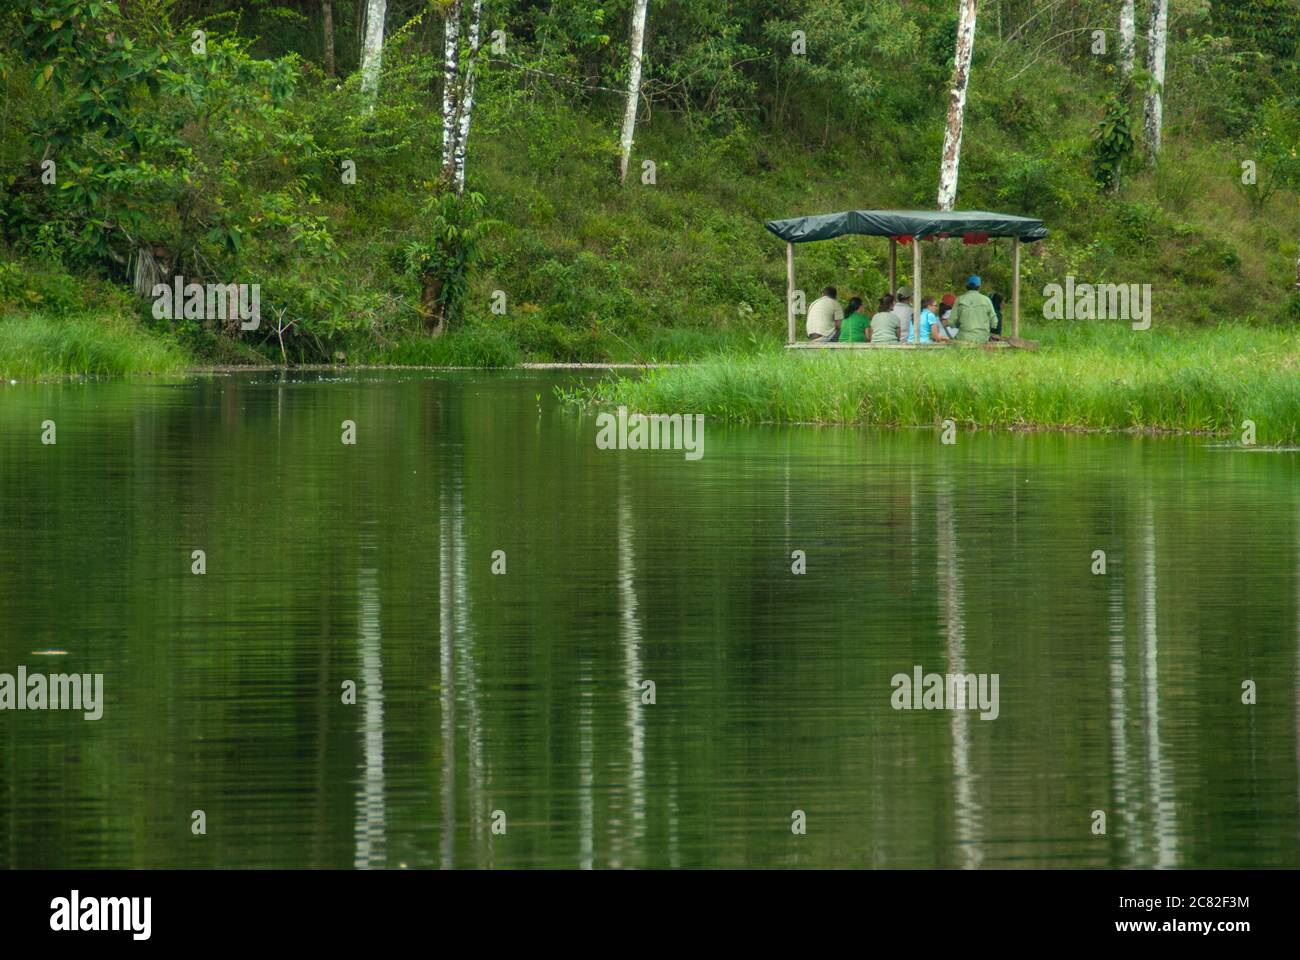 People riding a boat on way to a rainforest. Stock Photo